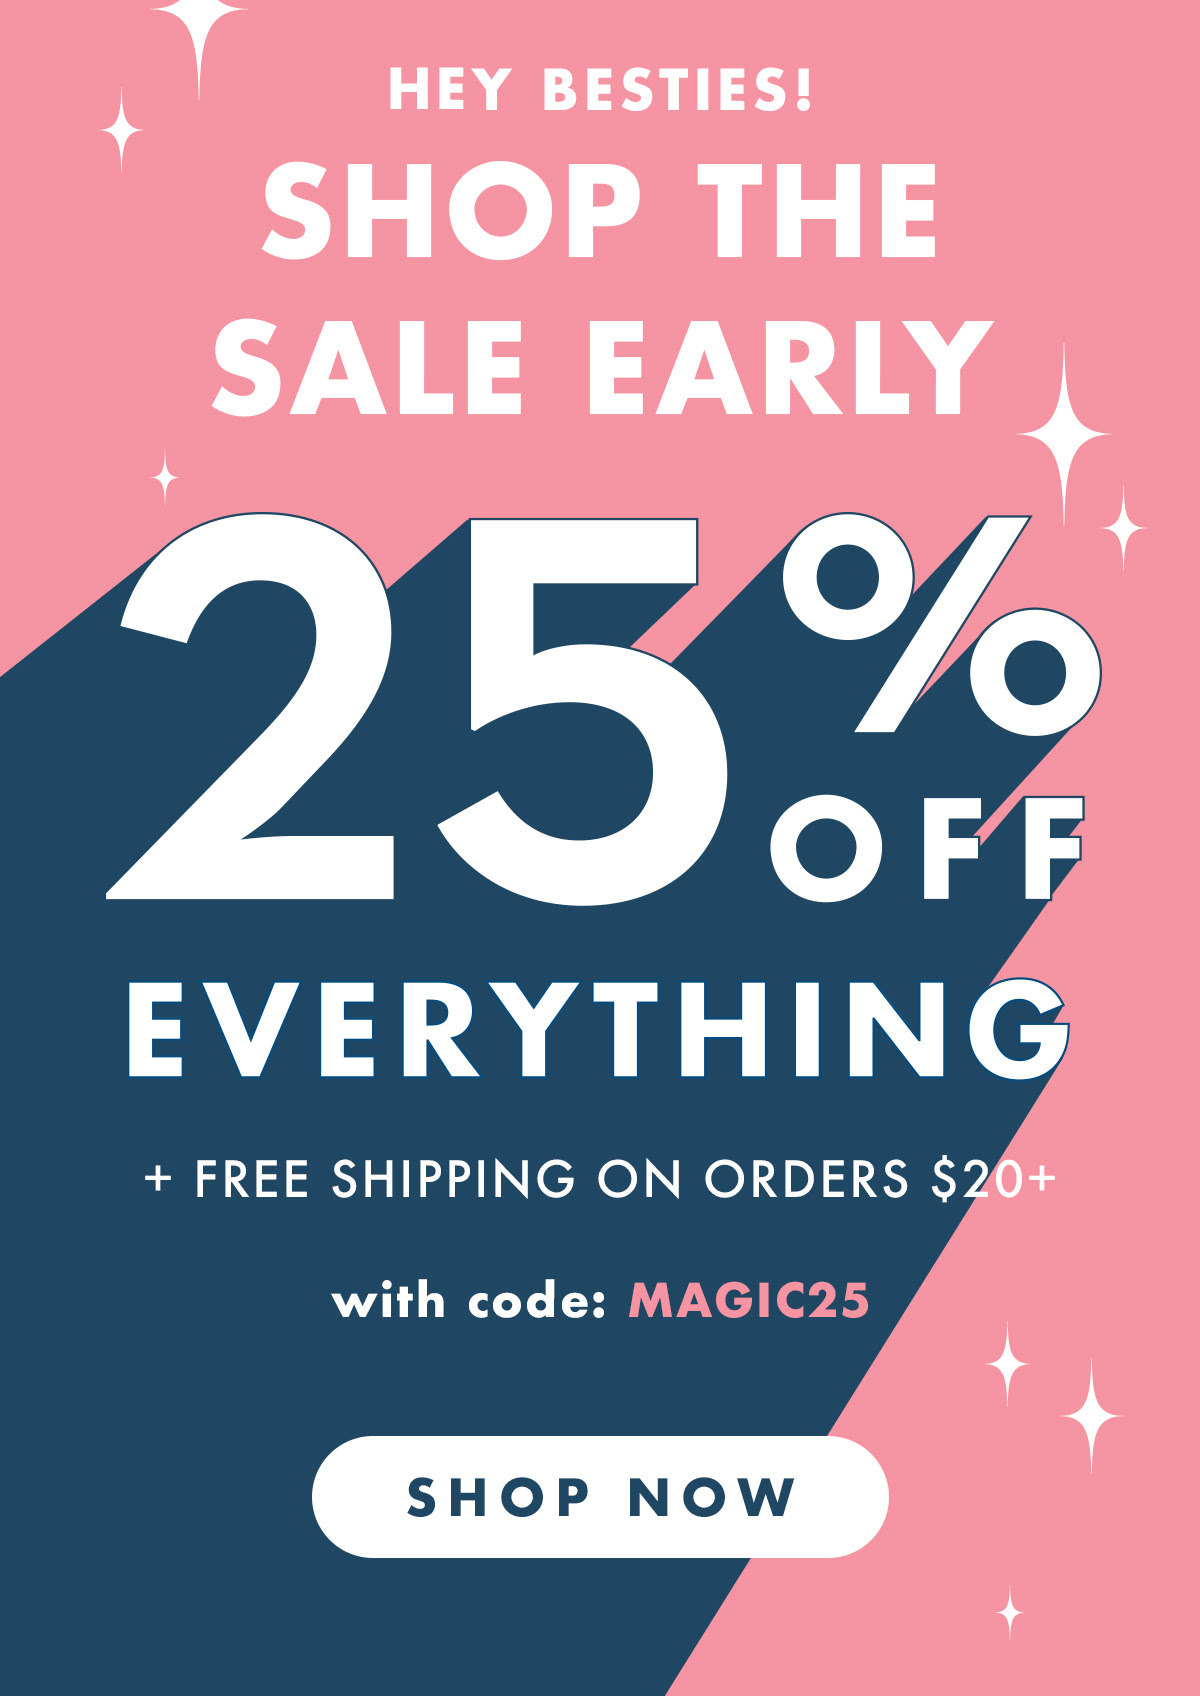 Olive & June Black Friday Sale: Get 25% Off EVERYTHING! - Hello ...